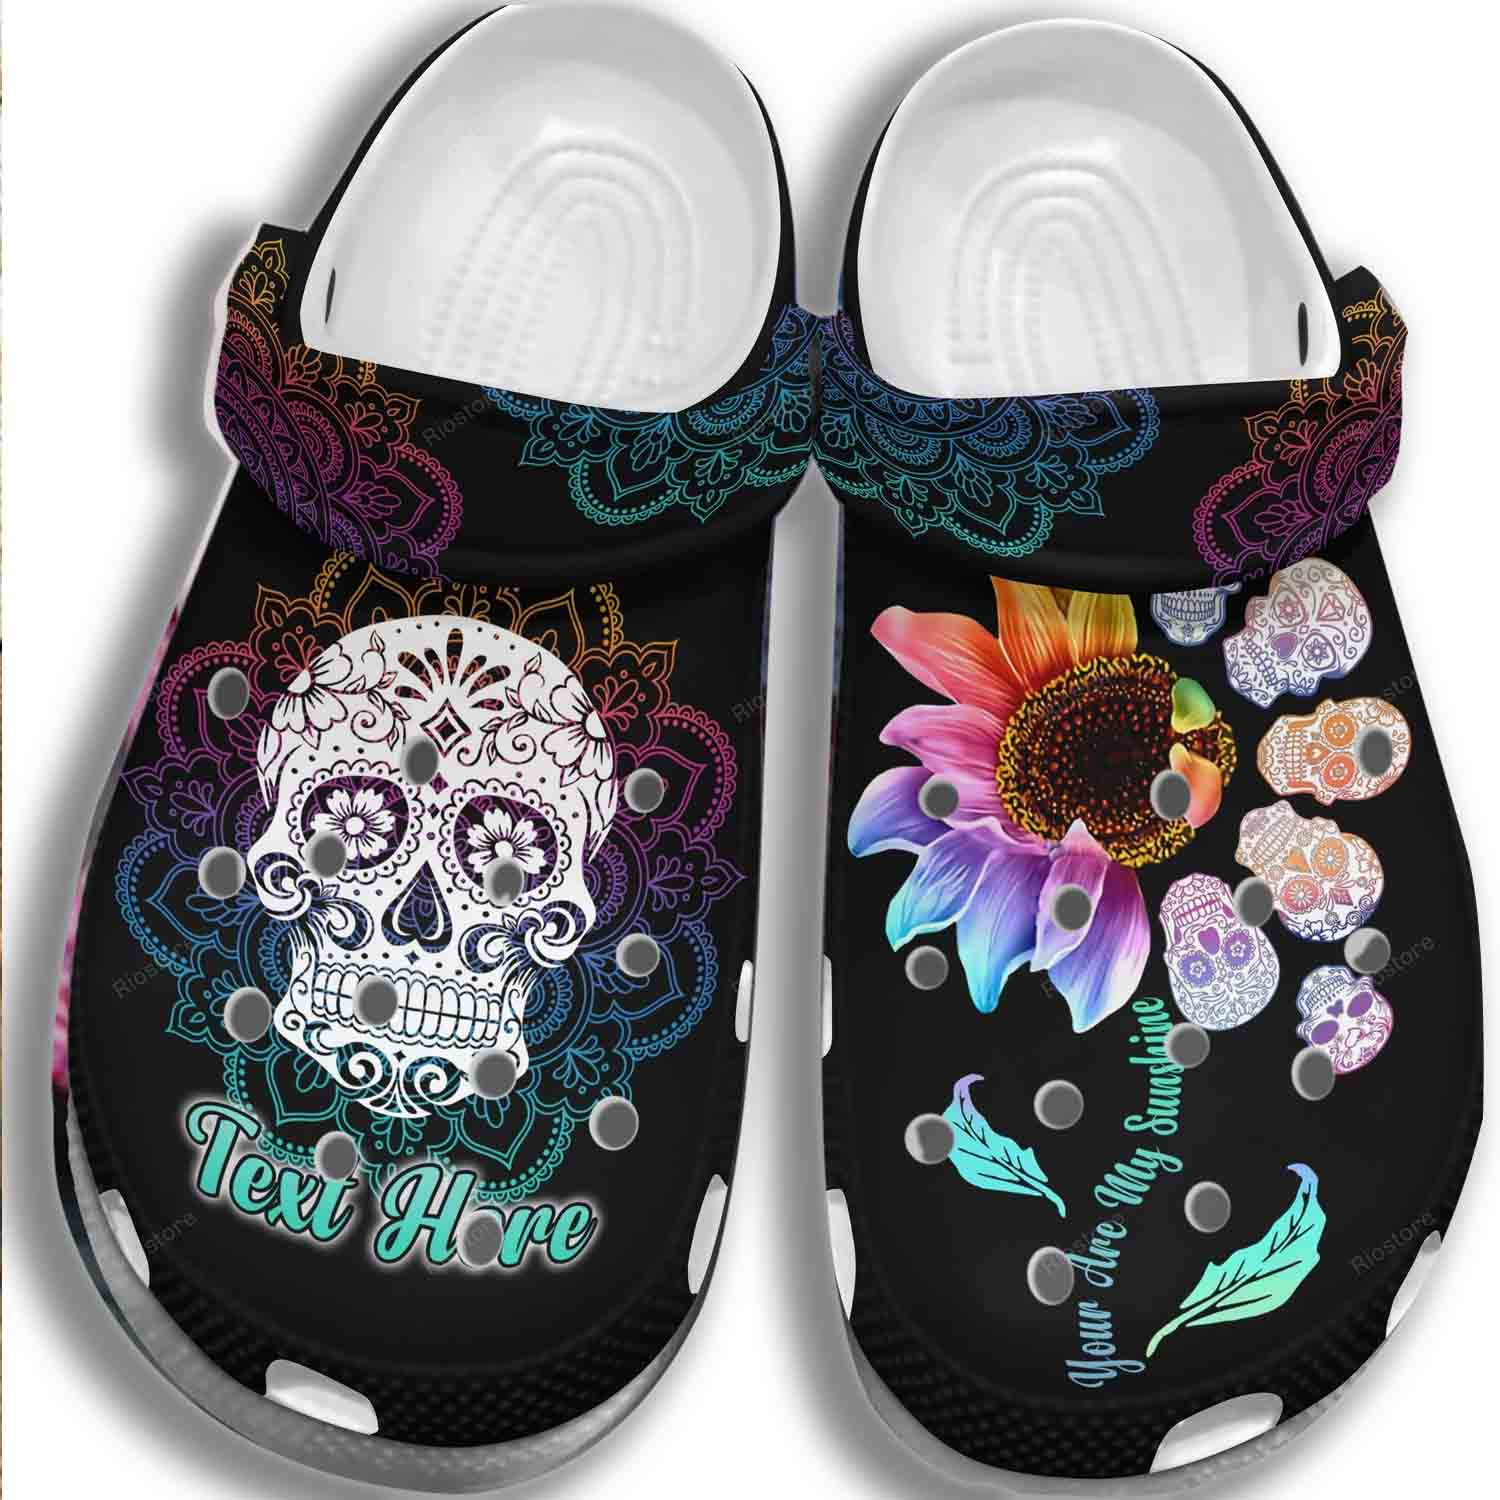 Sugar Skull Zero Given Sunflower Hippie Personalized Crocs Shoes - Mexican Skull Flower Tatoo Shoes Crocbland Clog Gifts For Men Women